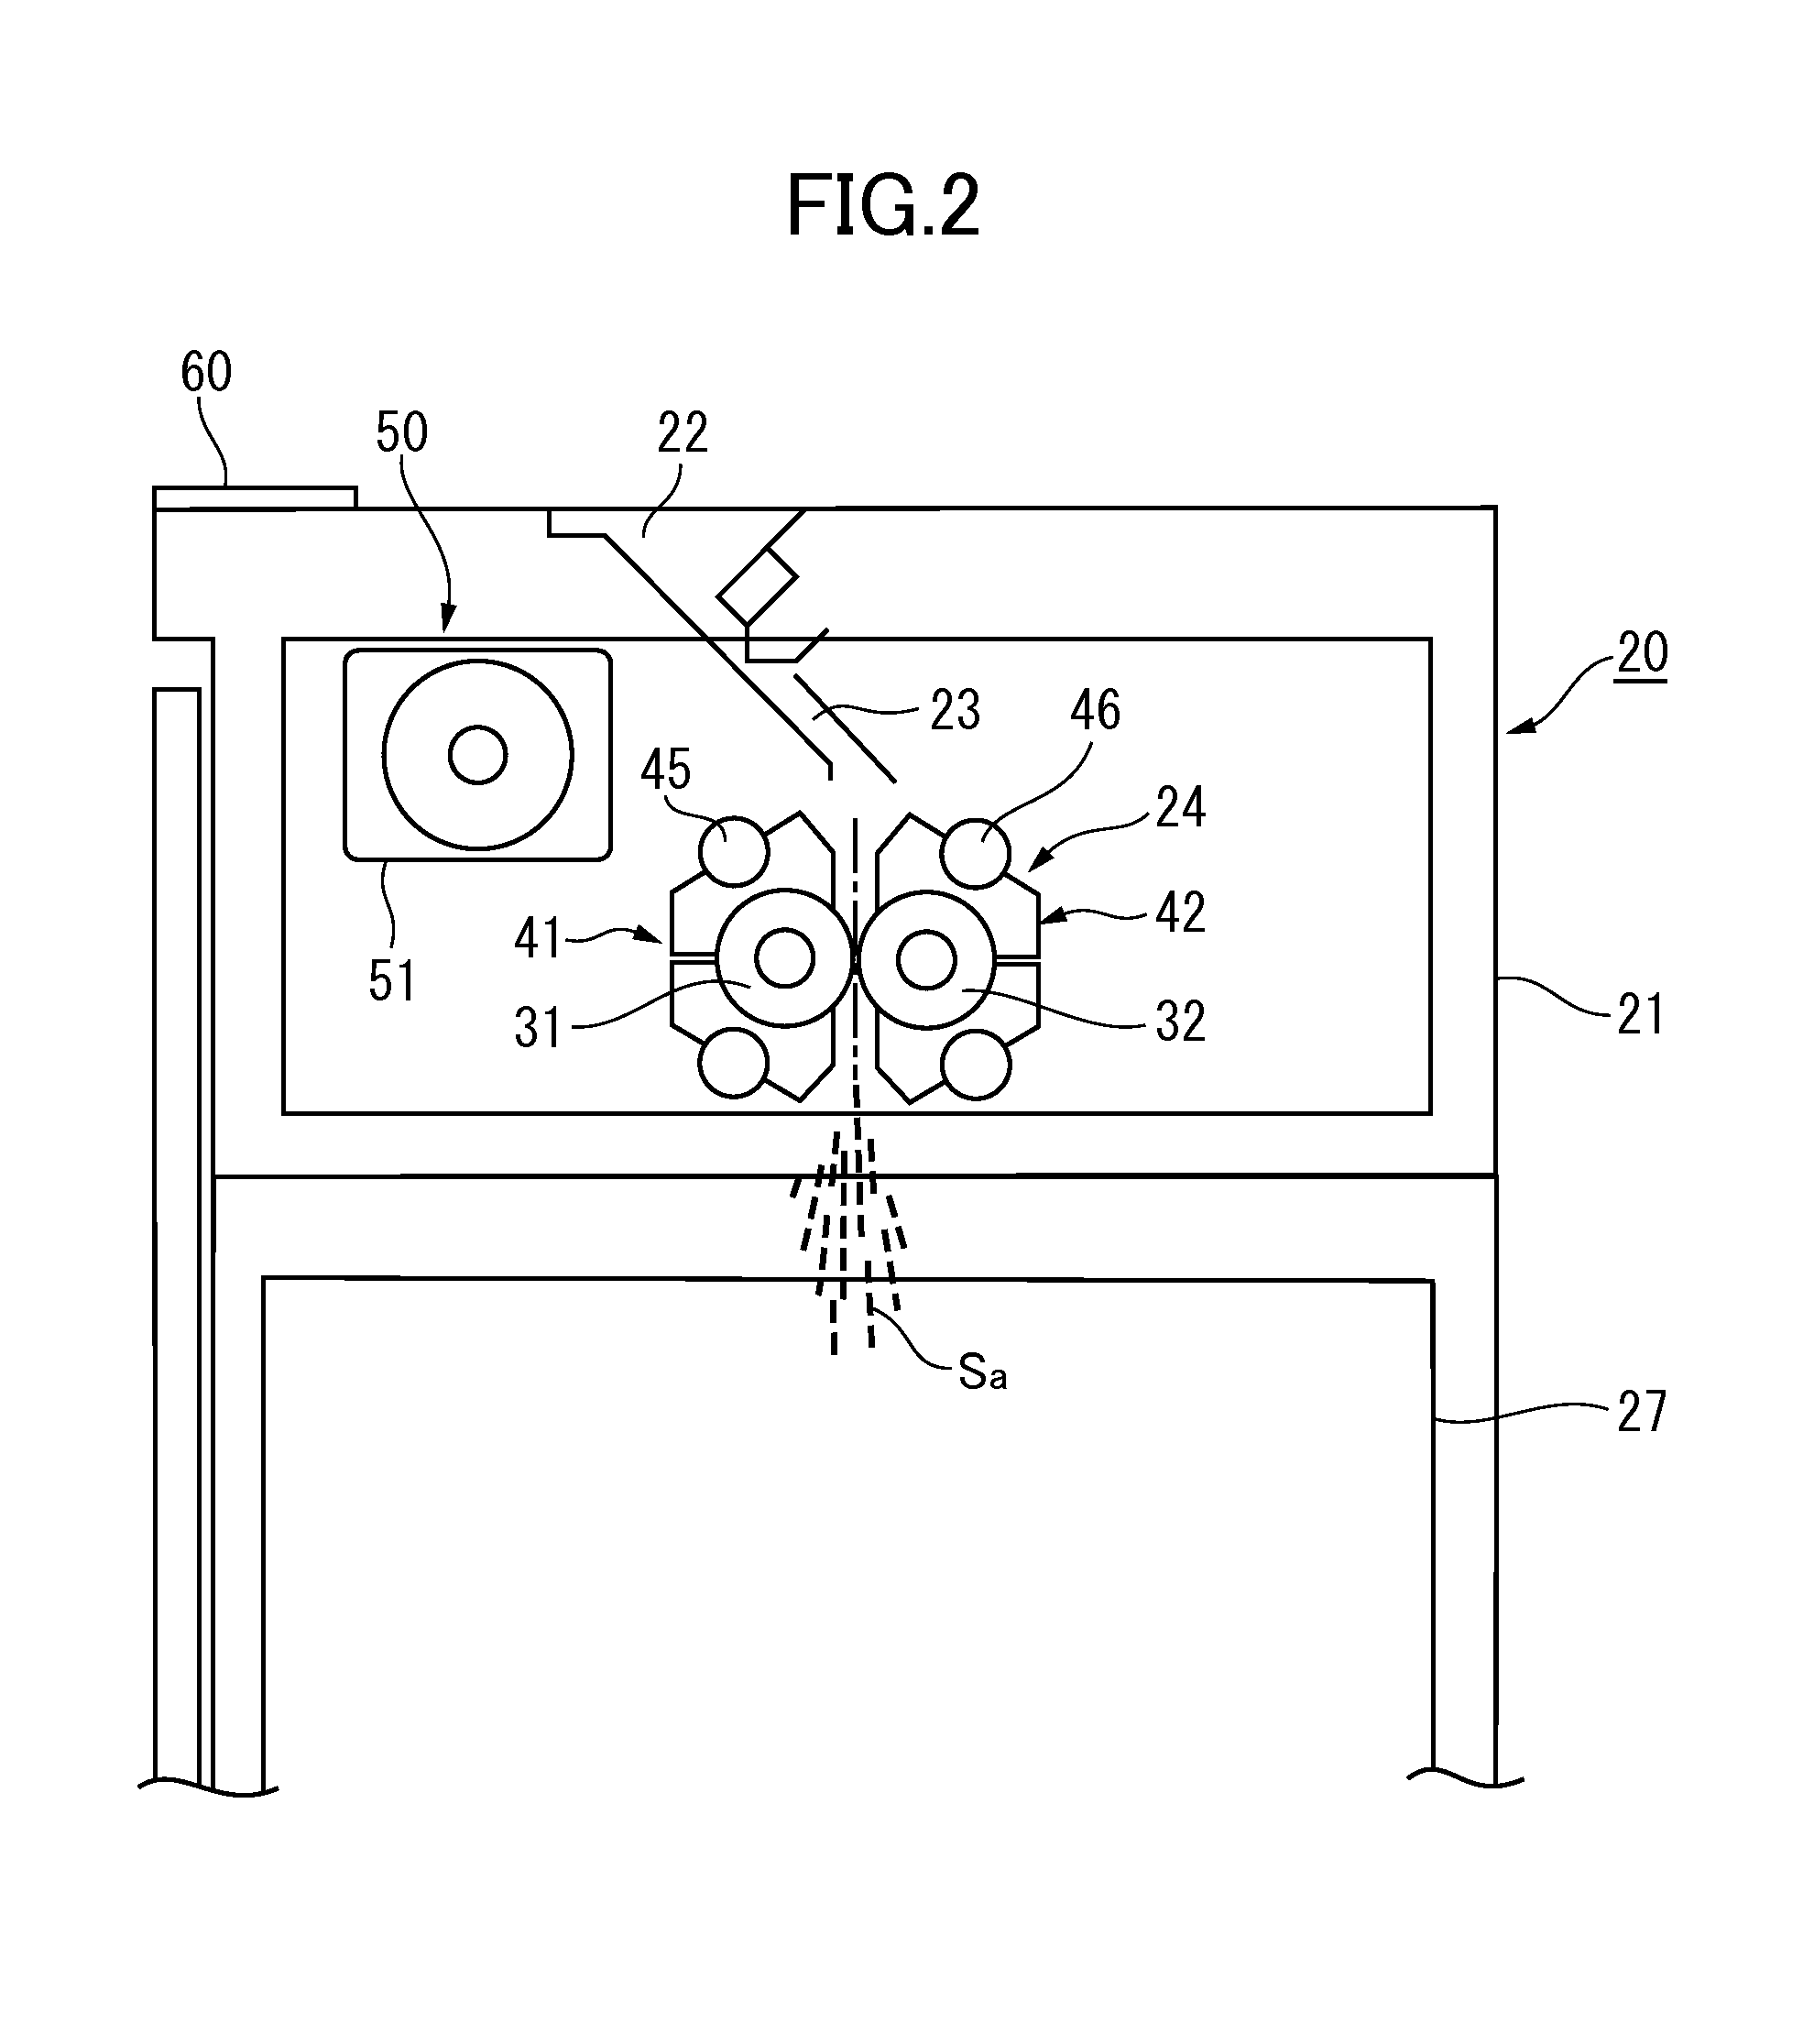 Shredder and sheet-like-object processing apparatus using the same